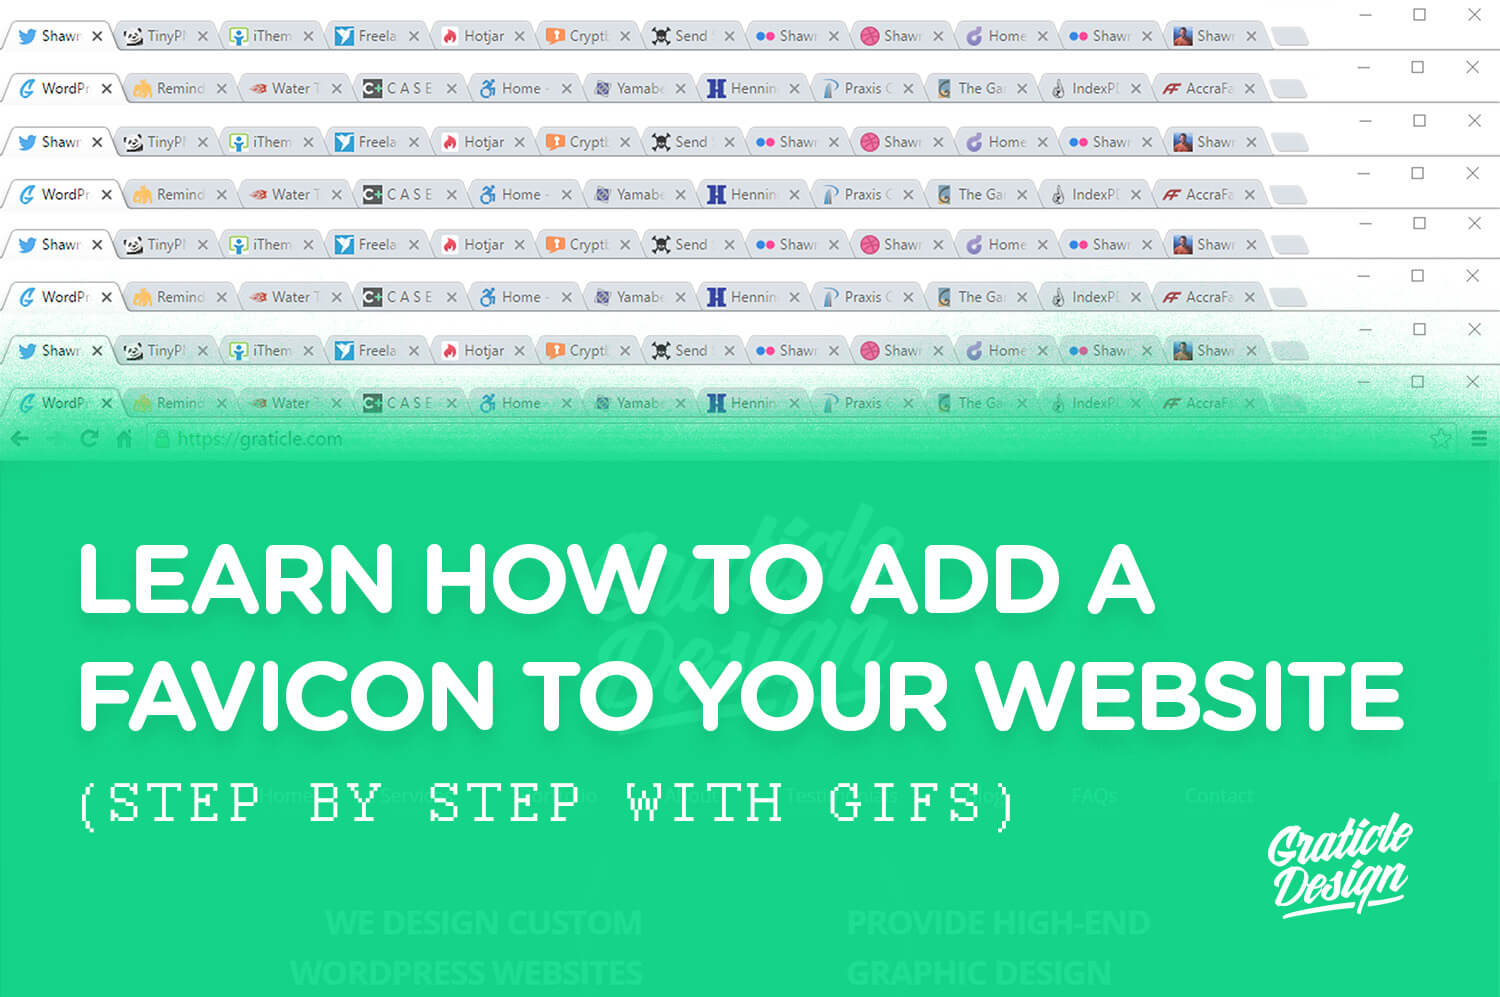 Learn How to Add a Favicon To Your Website - Step by Step Instructions with GIFs (small)